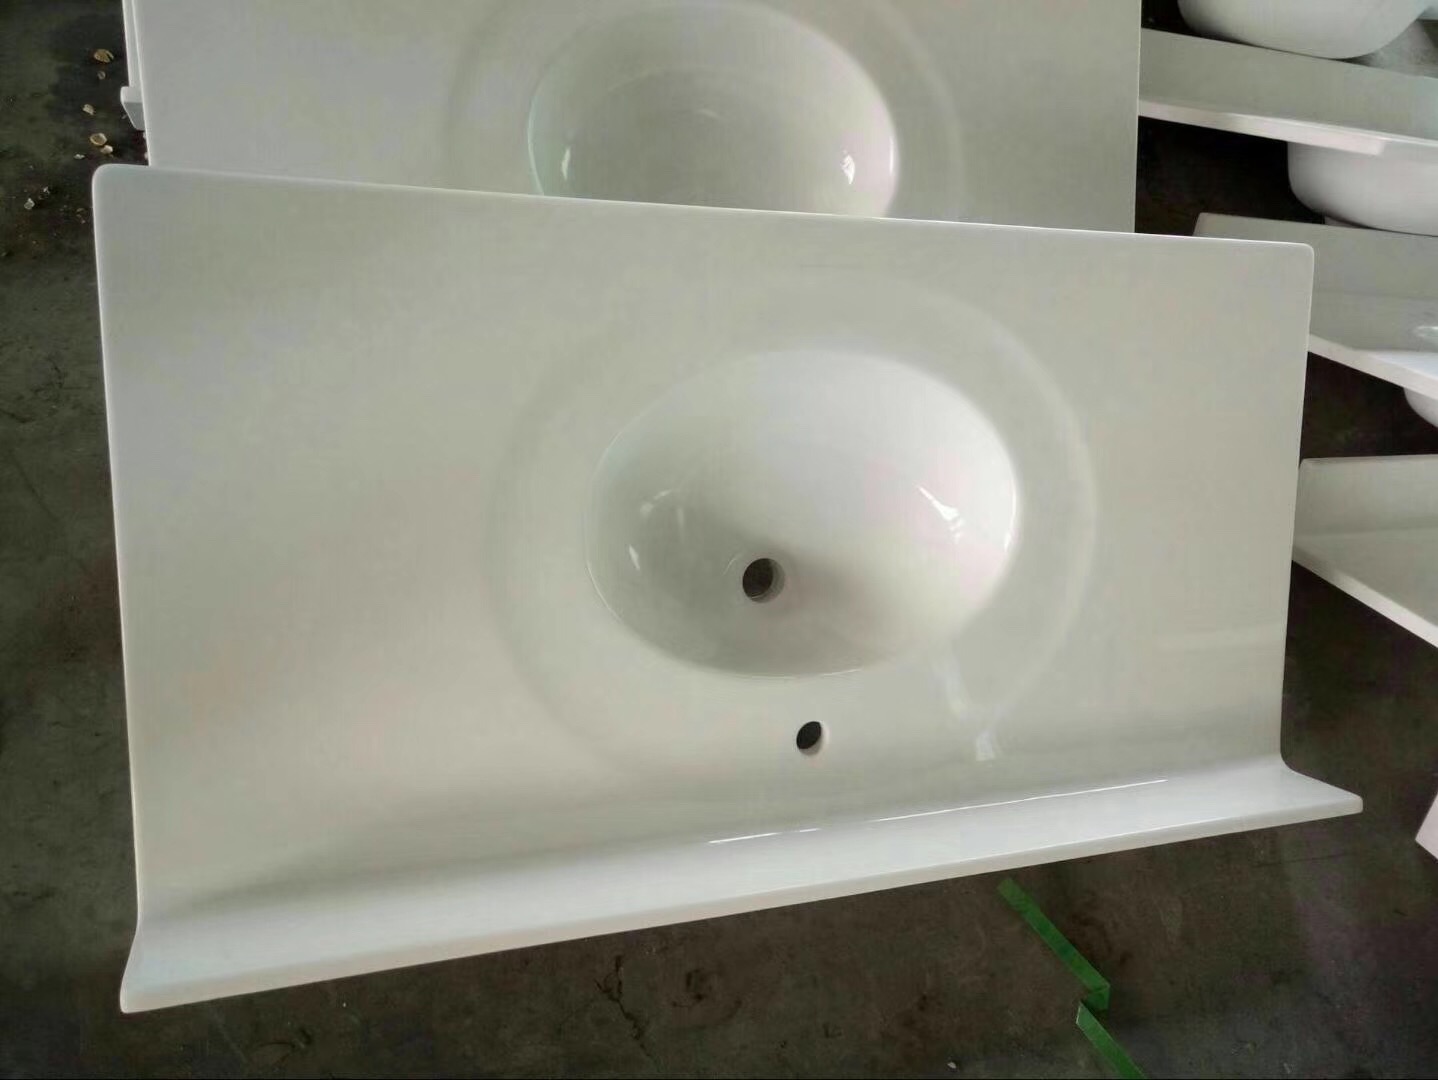 What Is A Cultured Marble Vanity Top Update Cultured Marble Countertops How To Cut Cultured Marble Vanity Top Marble Countertops Online Cultured Marble Countertops Dallas